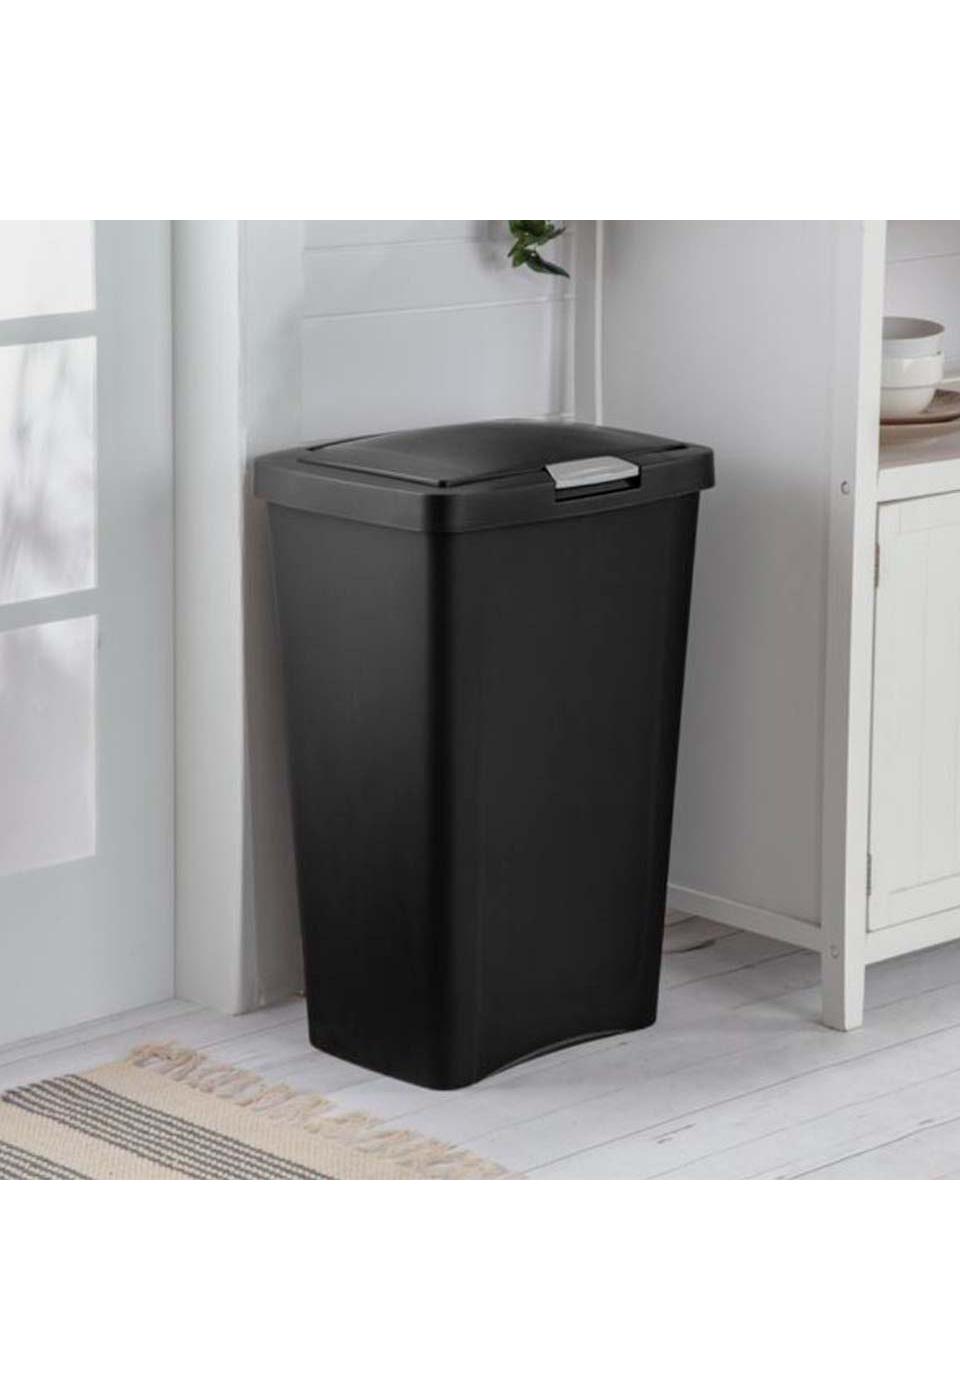 Sterilite Touch-Top Waste Basket - Black; image 2 of 3